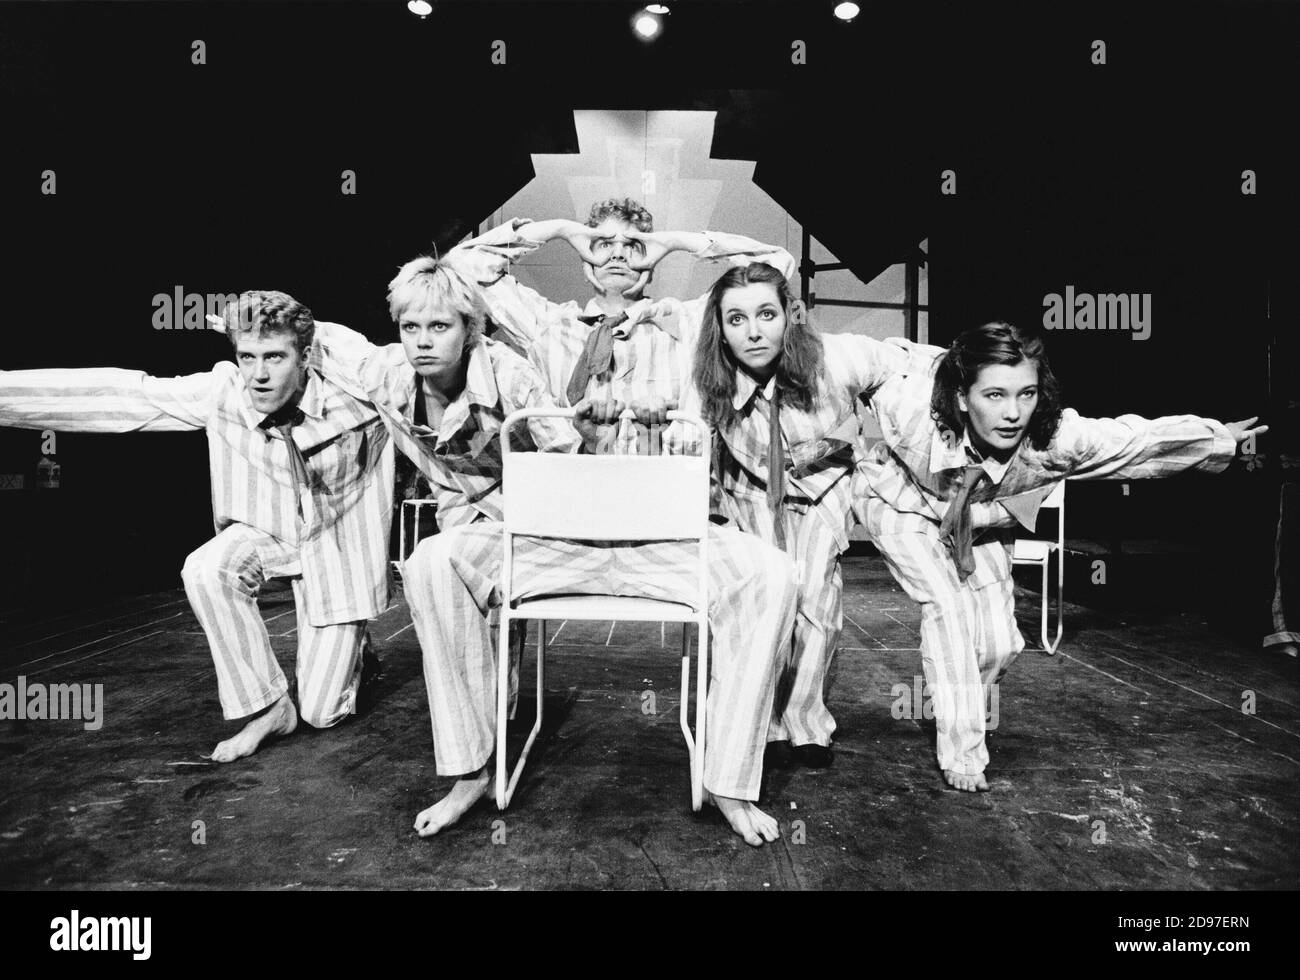 l-r: Richard Jobson, Emma Relph, Tim Potter, Yonnie Howgill, Kate McKenzie in THE DOG BENEATH THE SKIN by W.H. Auden & Christopher Isherwood at the New Half Moon Theatre, London E1  19/11/1981  set design: Philip Myall  costumes: Philip Myall & Jackie Hancher  lighting: Neil Cooper  director: Julian Sands Stock Photo